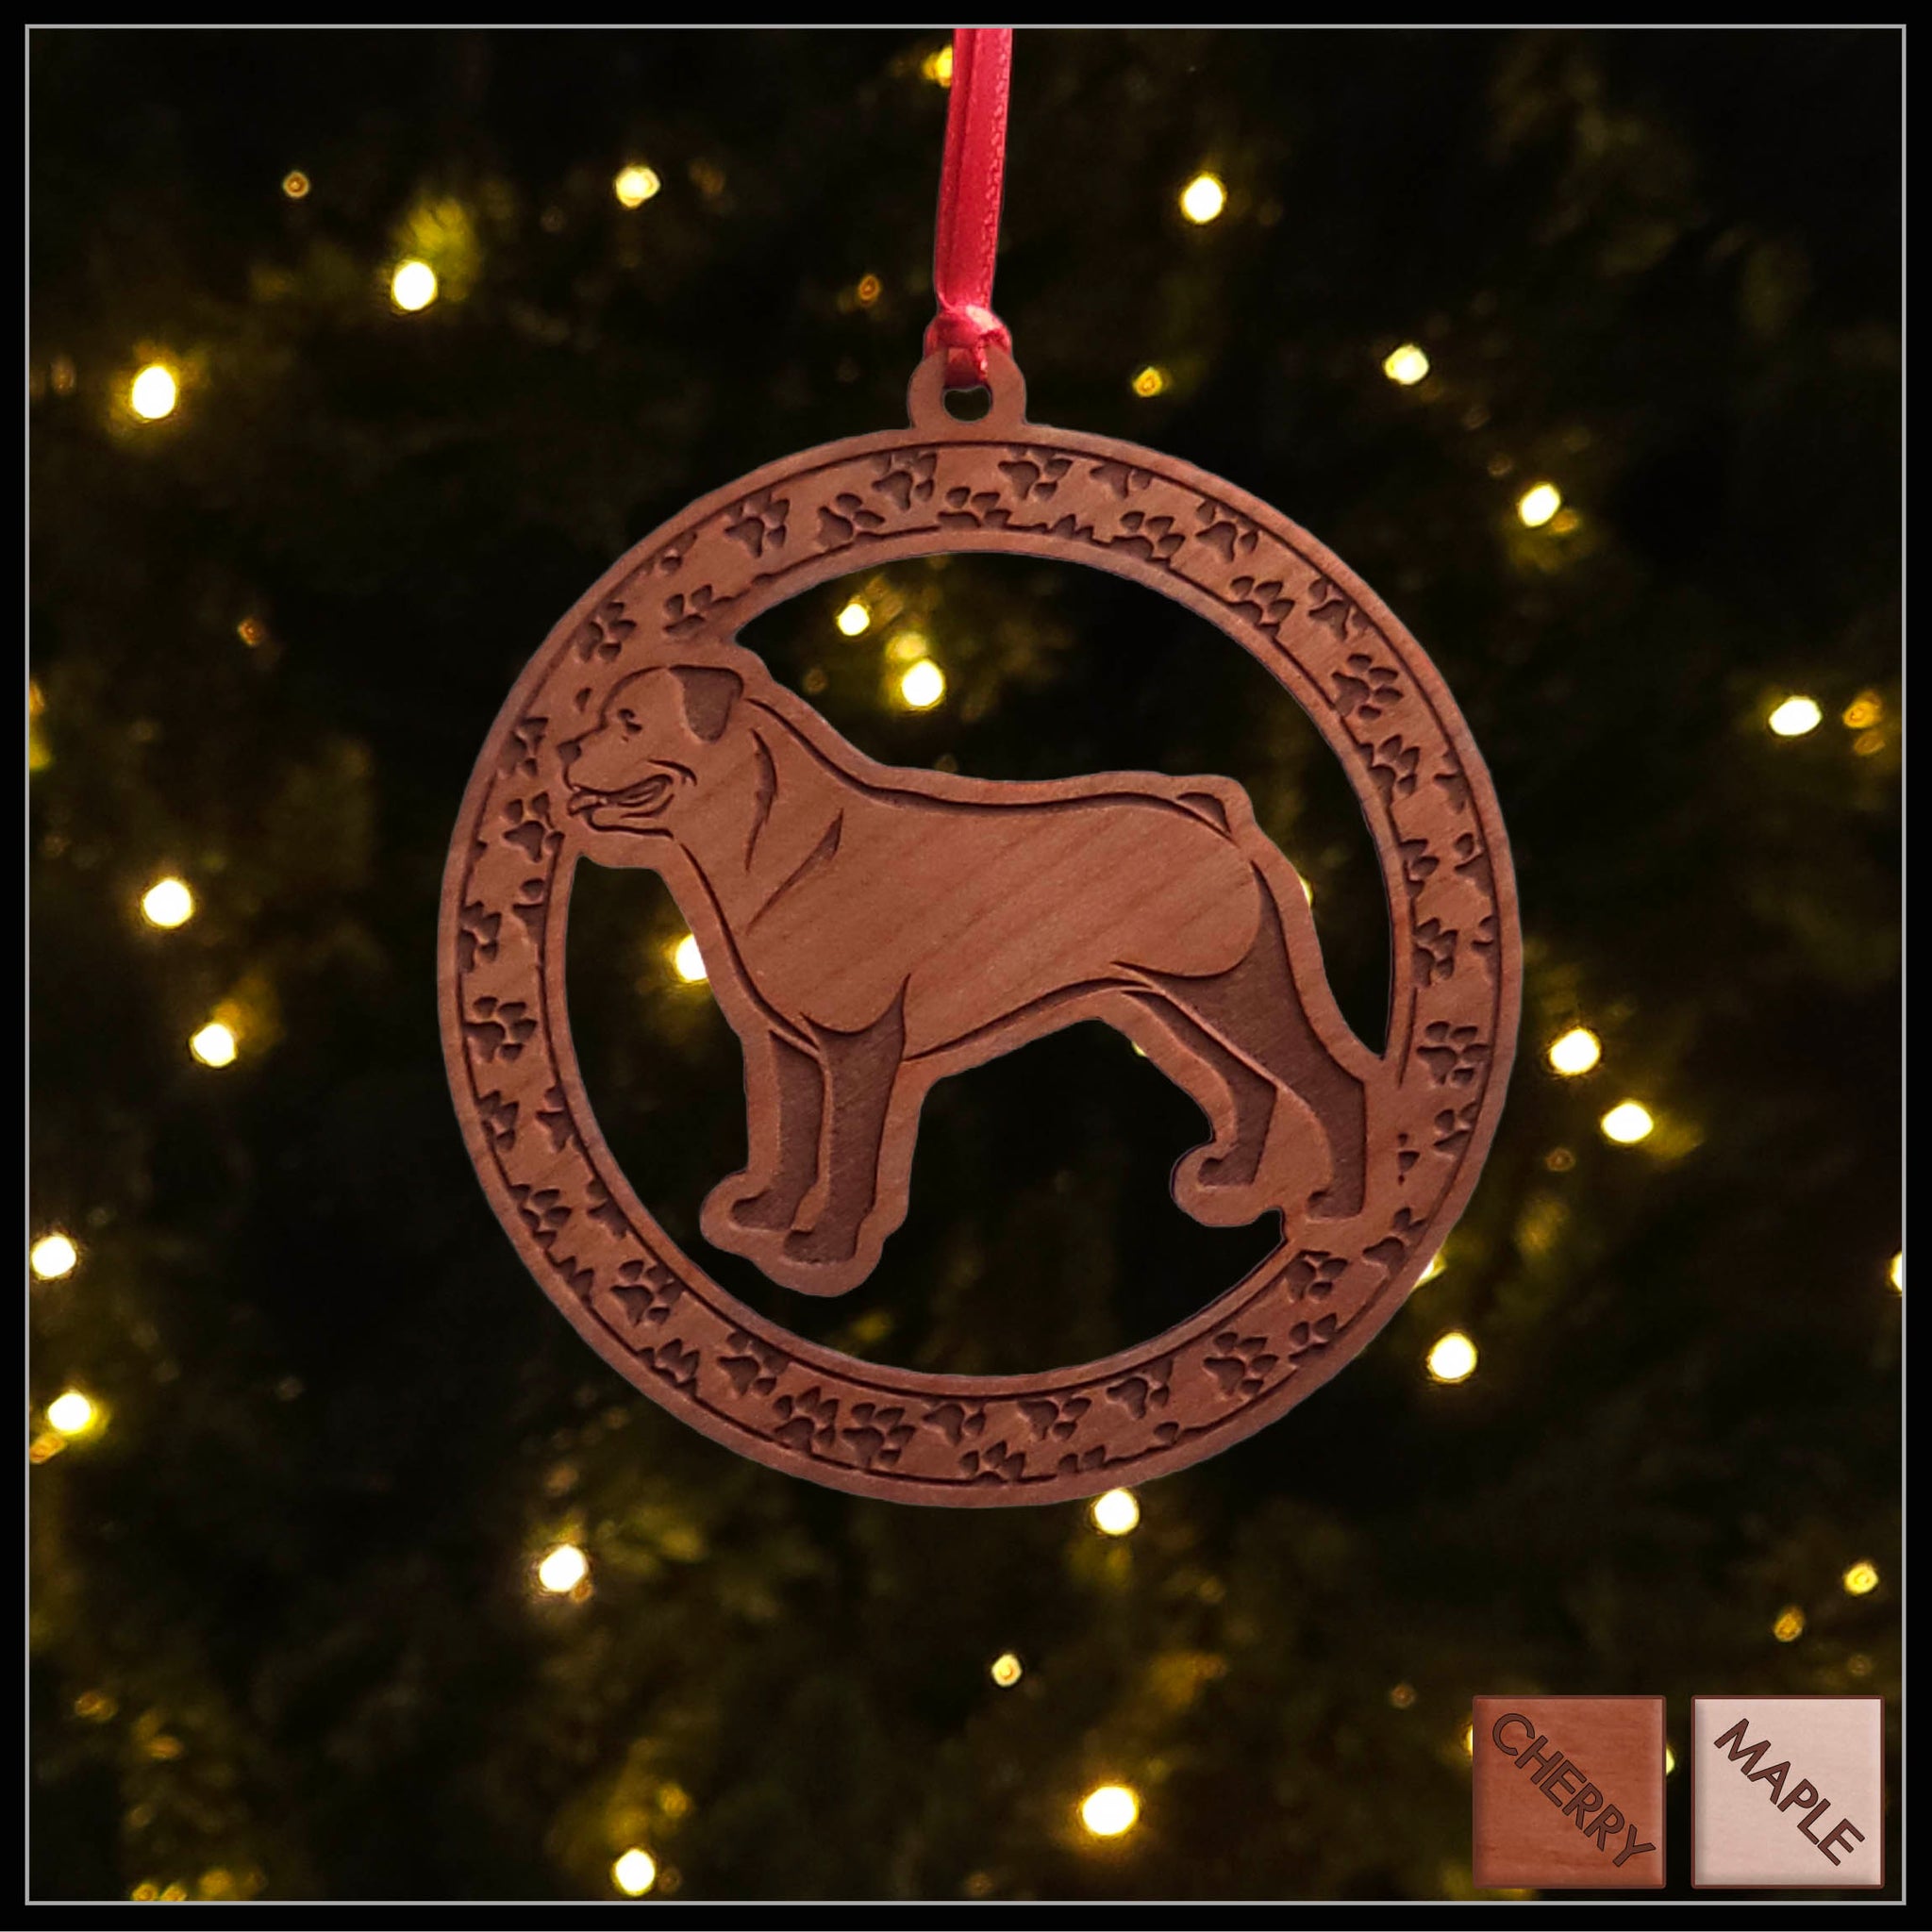 A round cherry wood veneer ornament with a border of small paw prints. The center of the ornament is a Rottweiler dog.